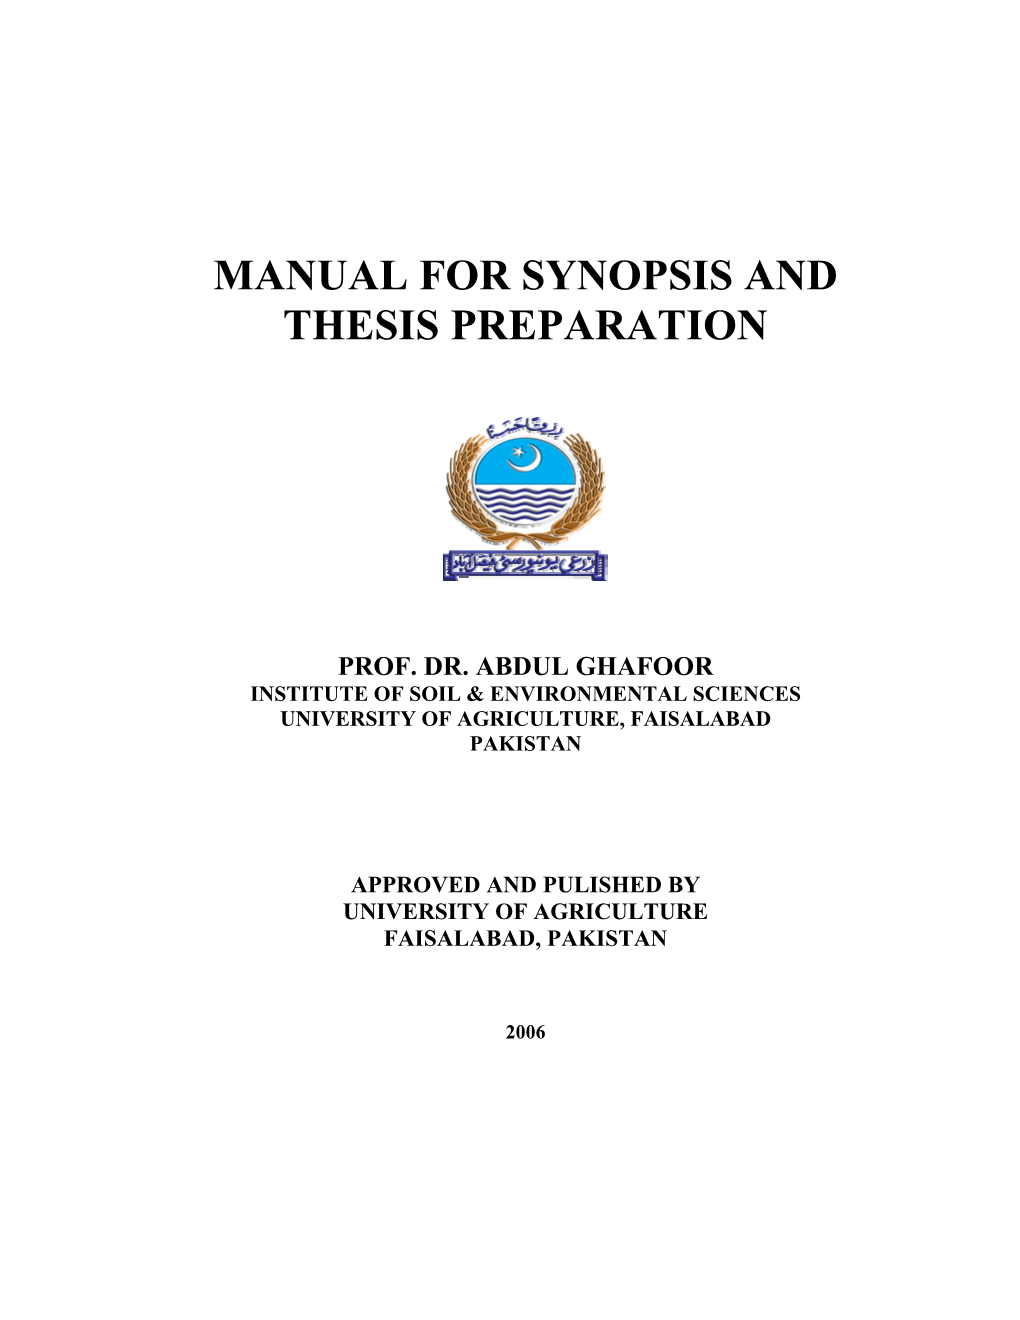 Manual for Synopsis and Thesis Preparation